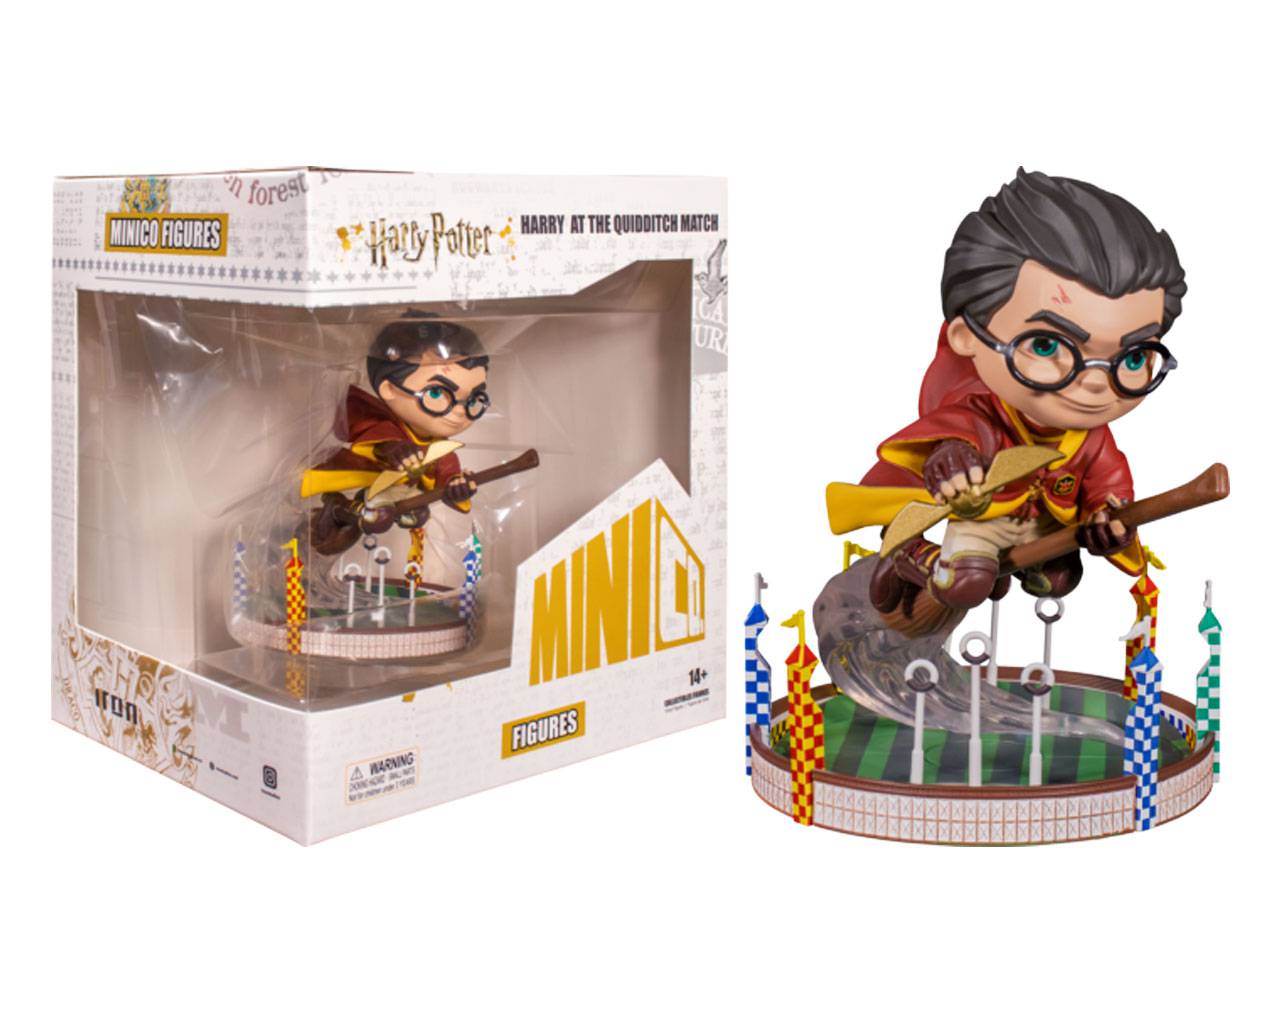 Harry Potter at the Quidditch Match MINICO FIGURES